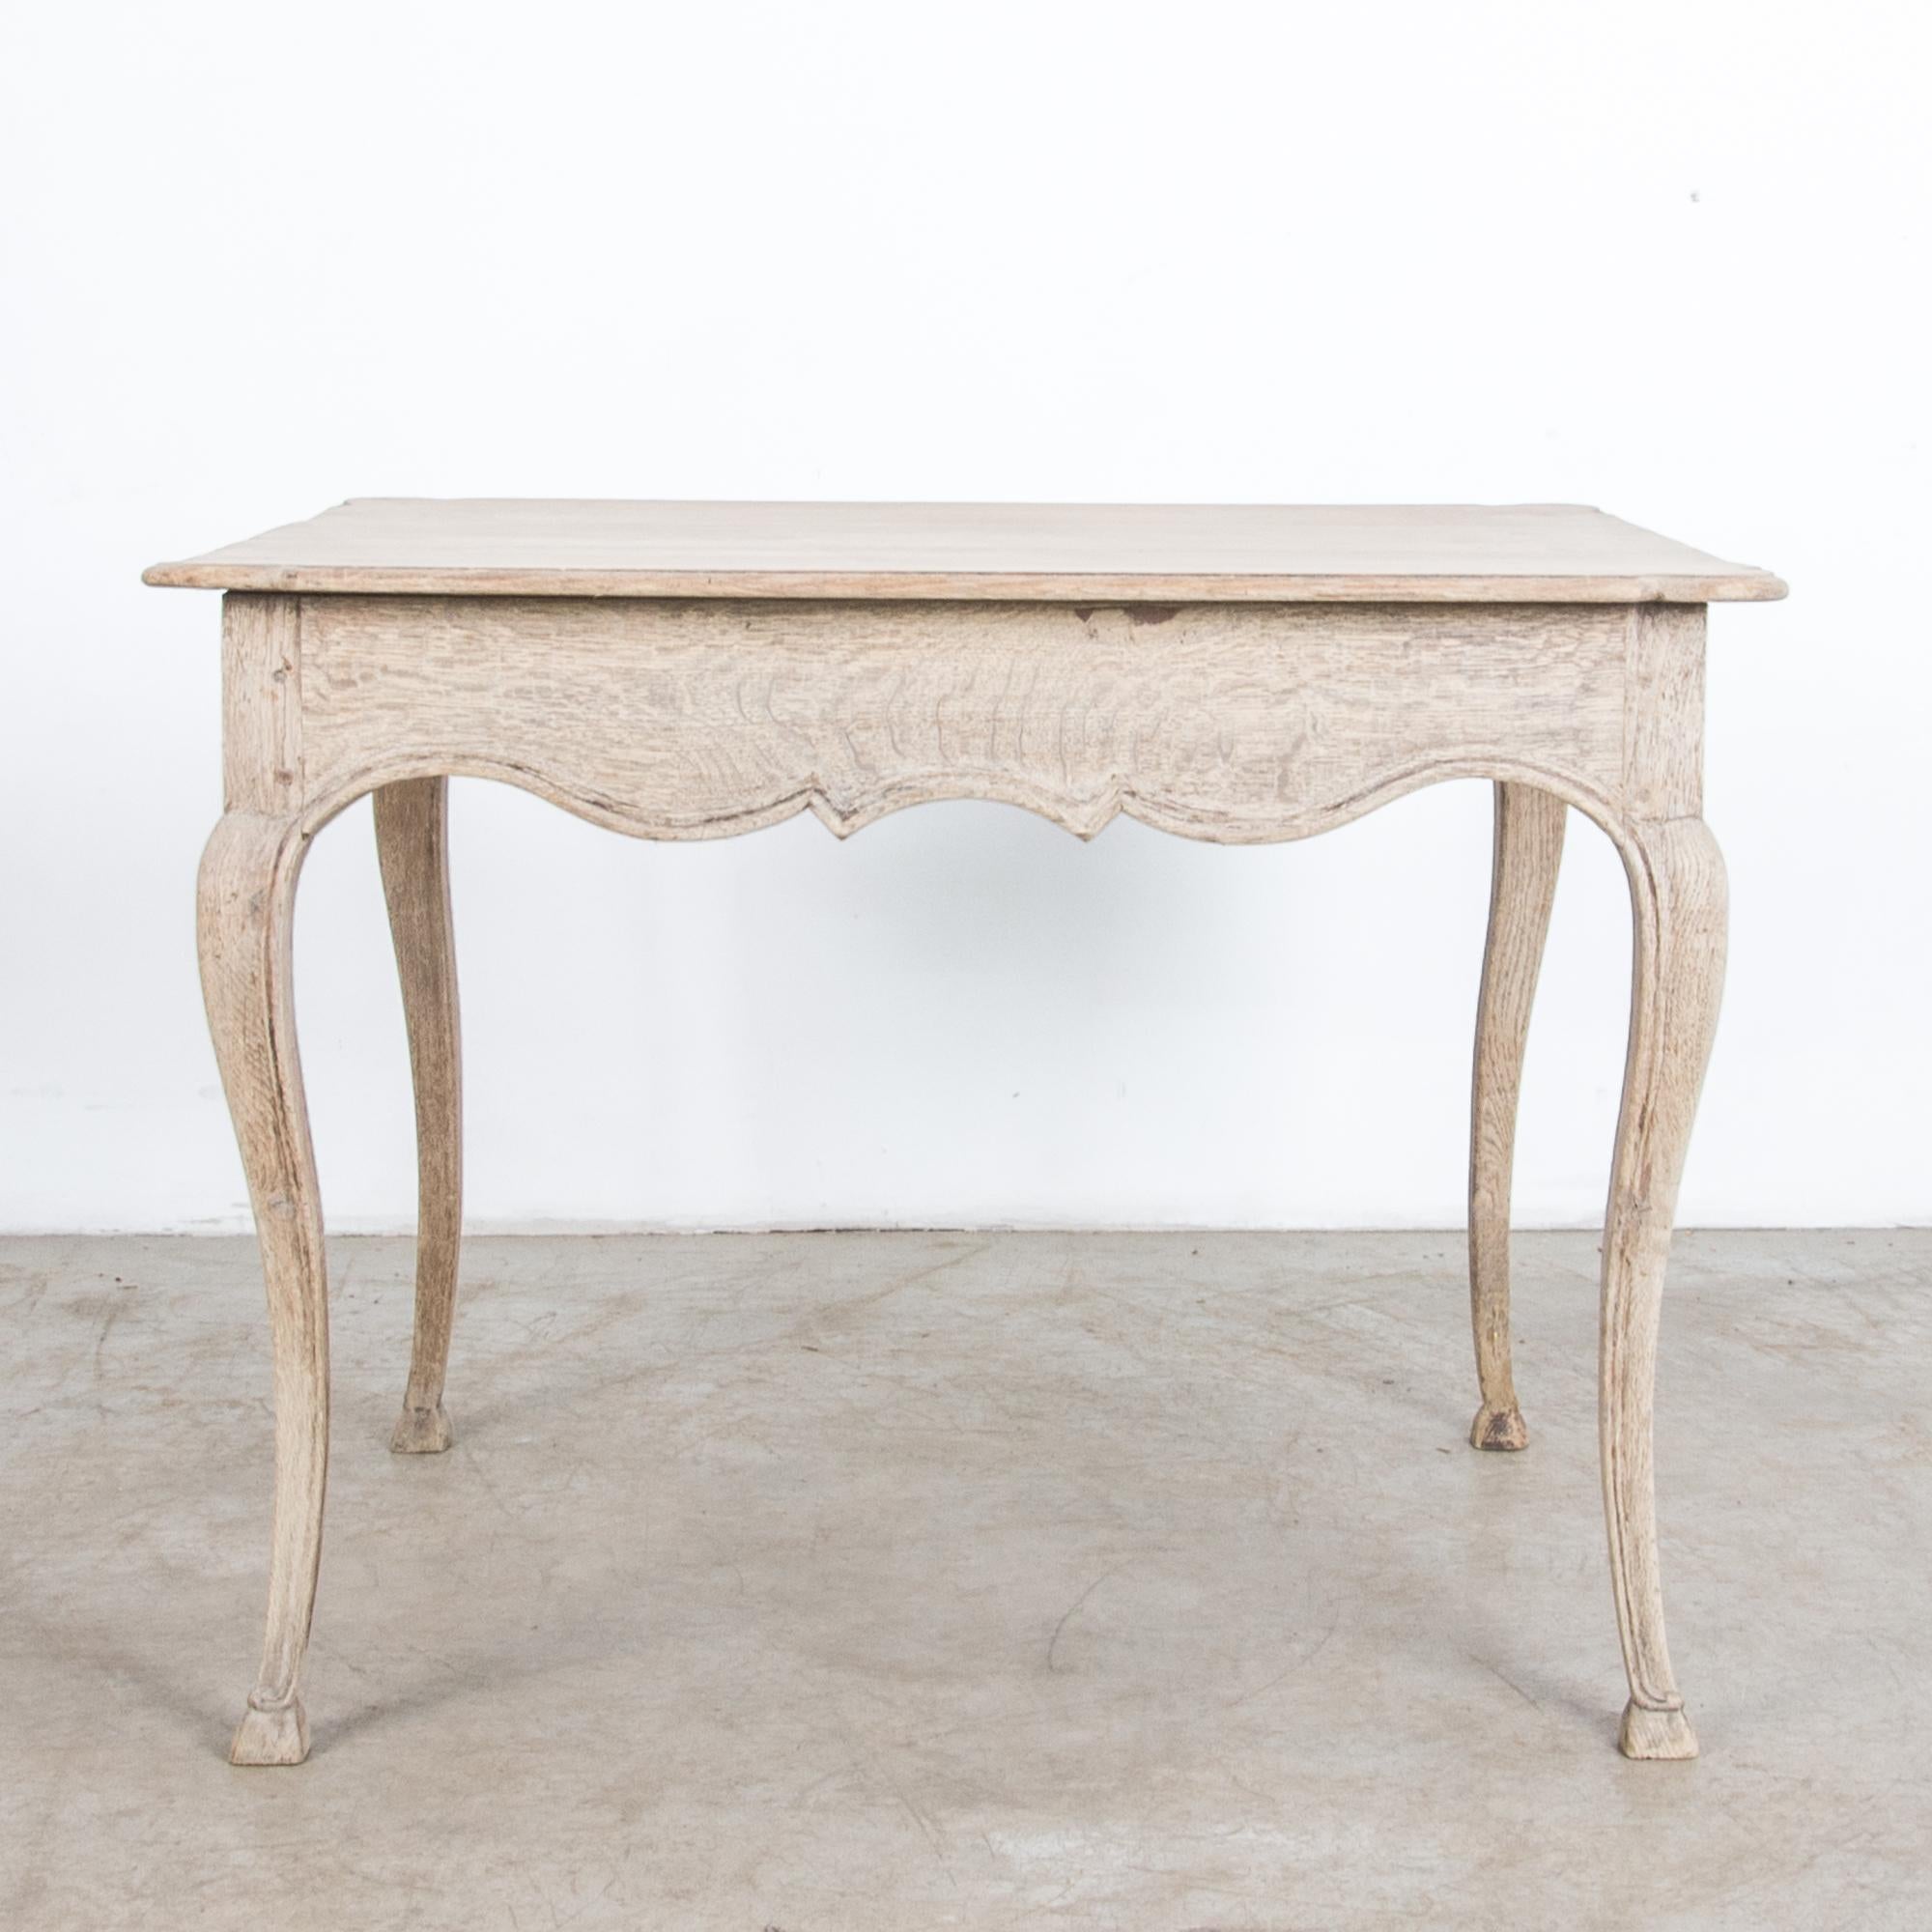 A simple and elegant oak table from France, circa 1880. Rustic yet refined, this oak table is crafted after the traditions of local craftsmen. Away from the capital, carpenters interpreted the latest fashion in pared down styles, recalling their